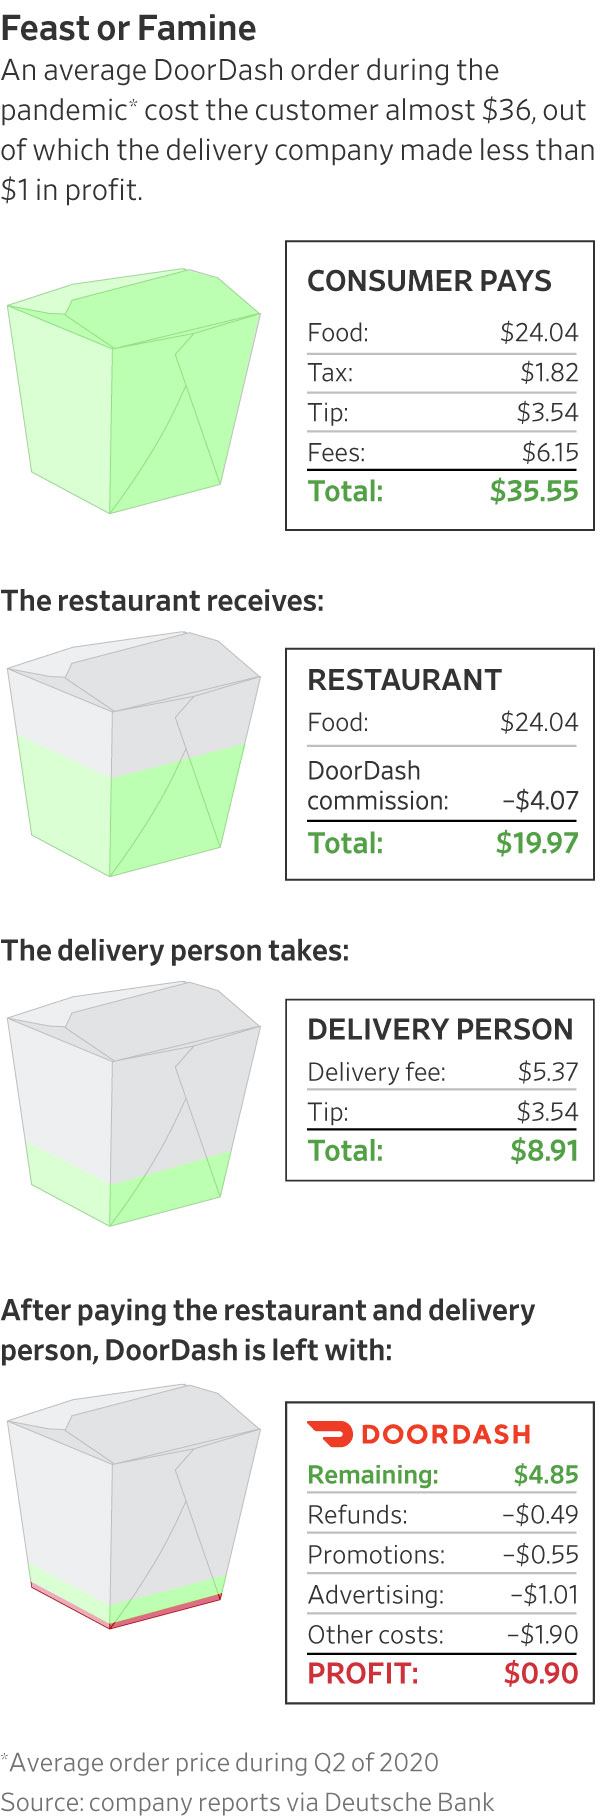 The Brutal Economics of Food Delivery: The Case of DASH